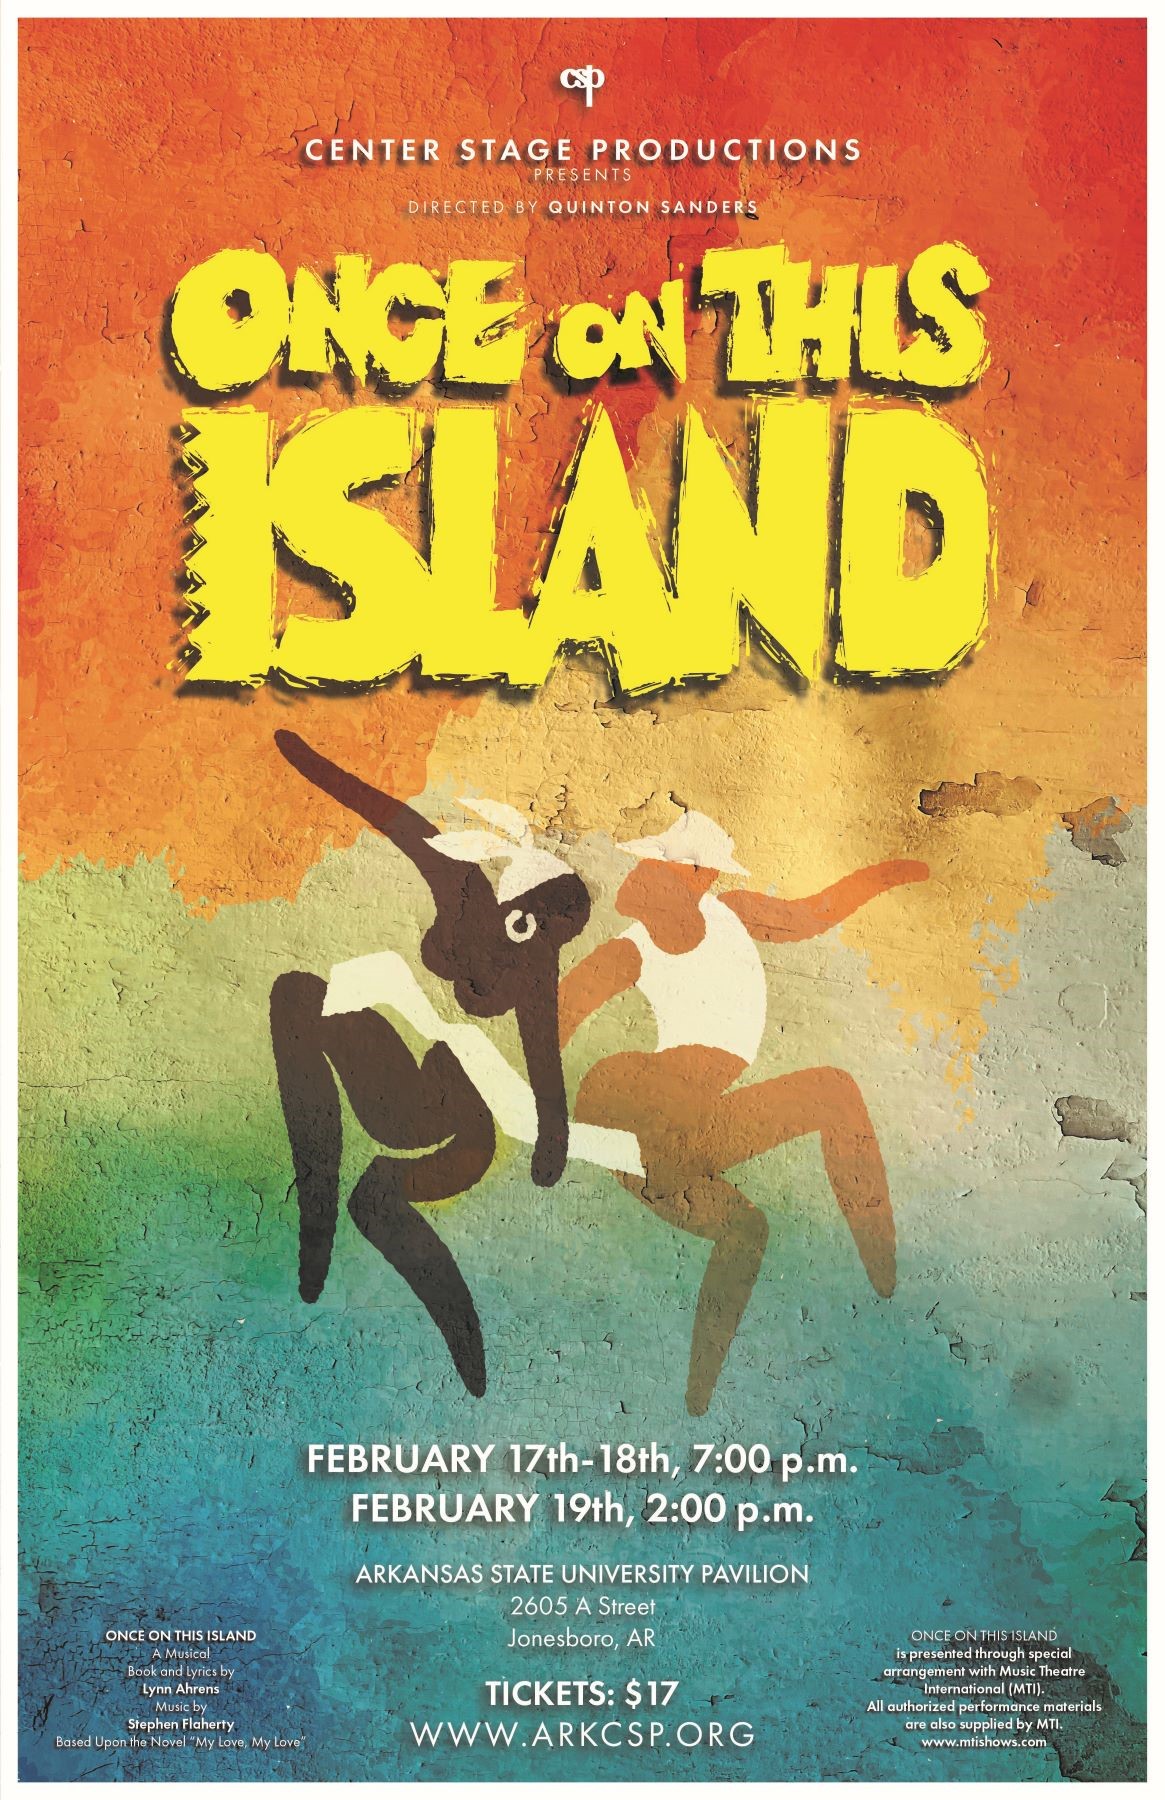 Once On This Island  on Feb 18, 19:00@ASU pavilion - Buy tickets and Get information on Center Stage Productions 